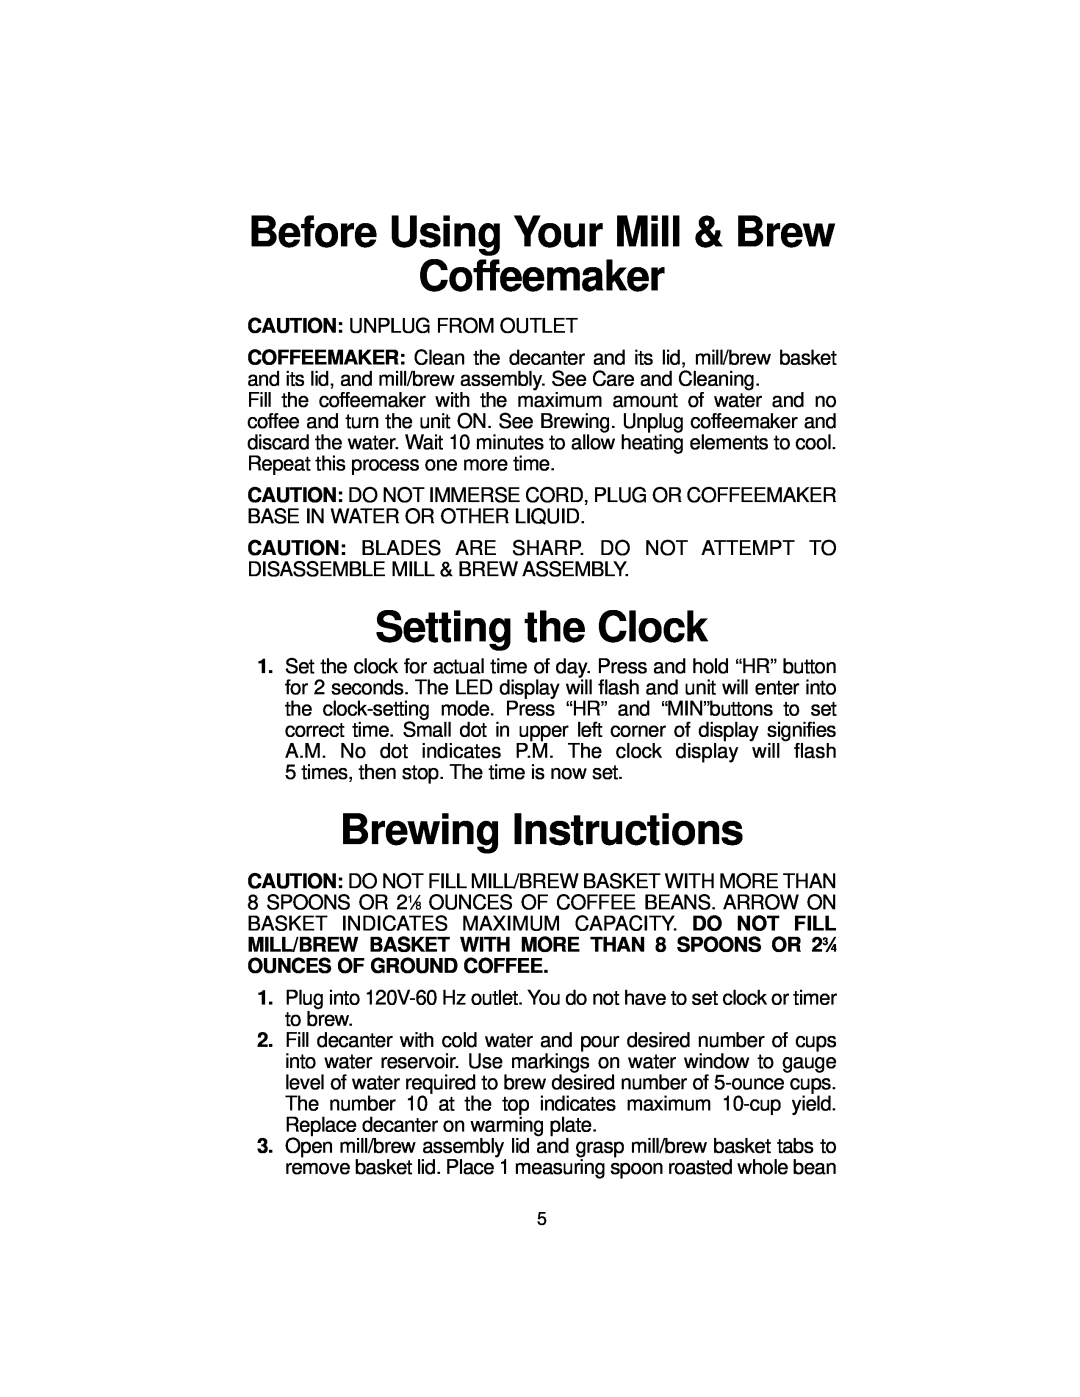 Melitta MB80 manual Before Using Your Mill & Brew Coffeemaker, Setting the Clock, Brewing Instructions 